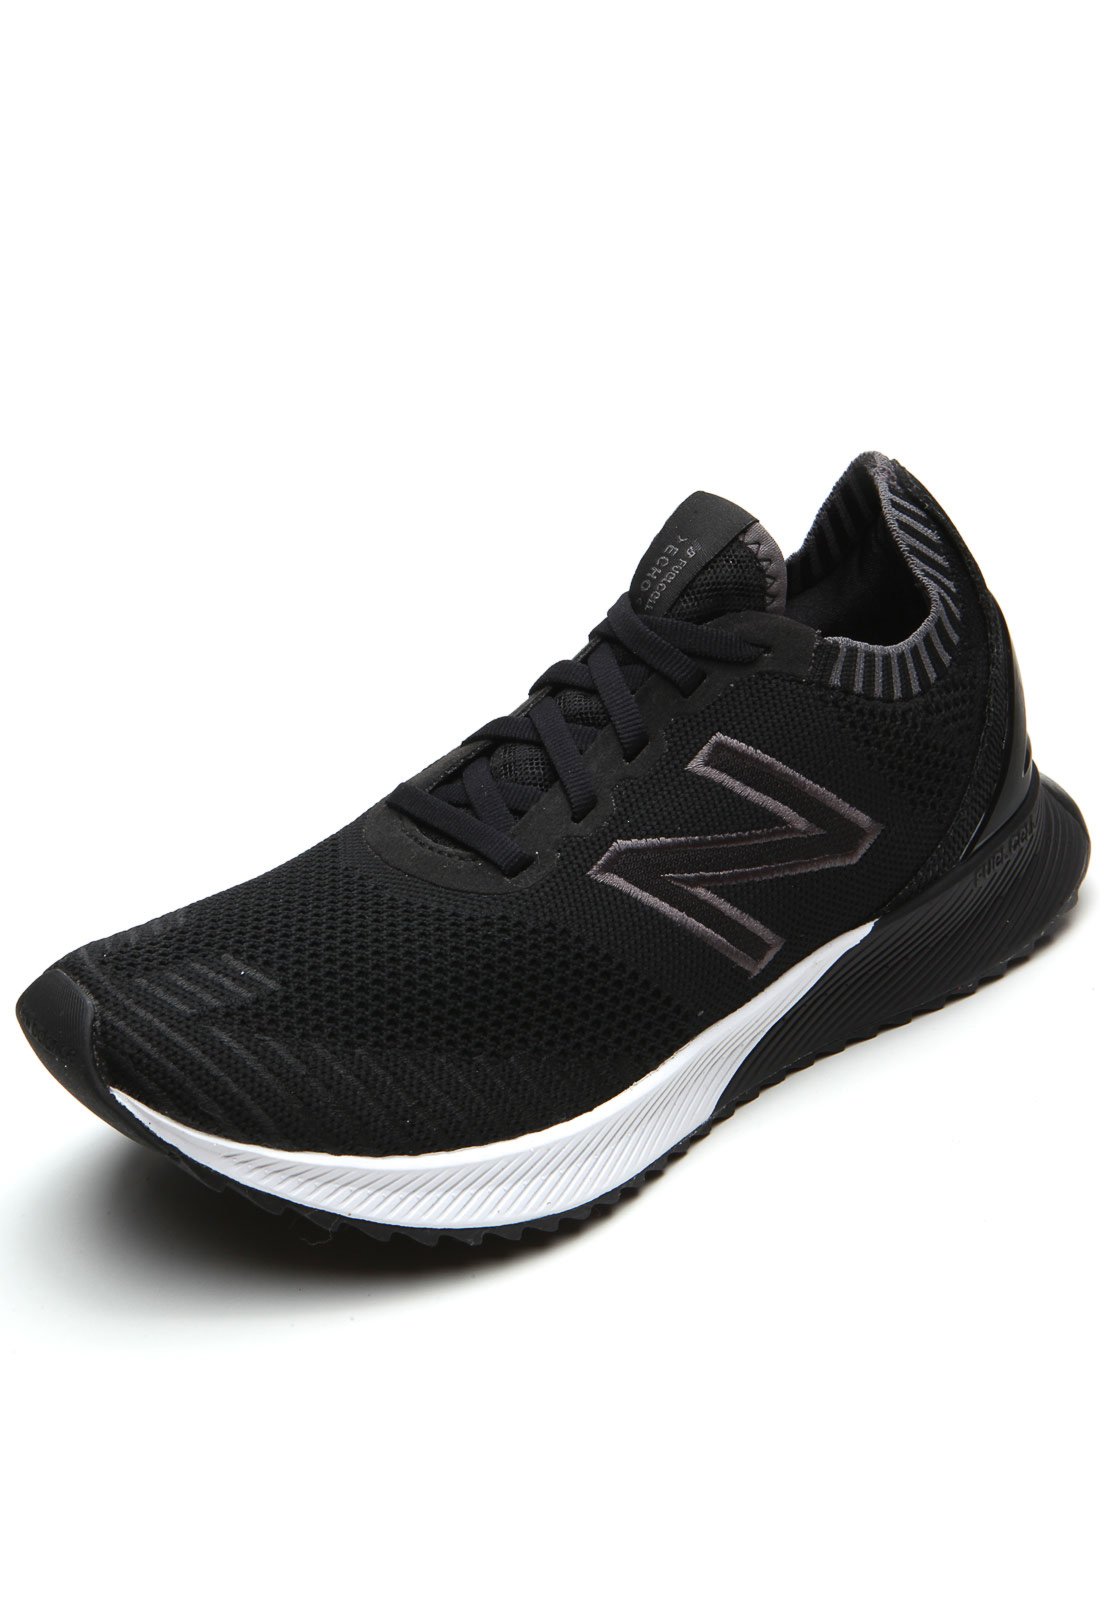 tenis new balance fuel cell